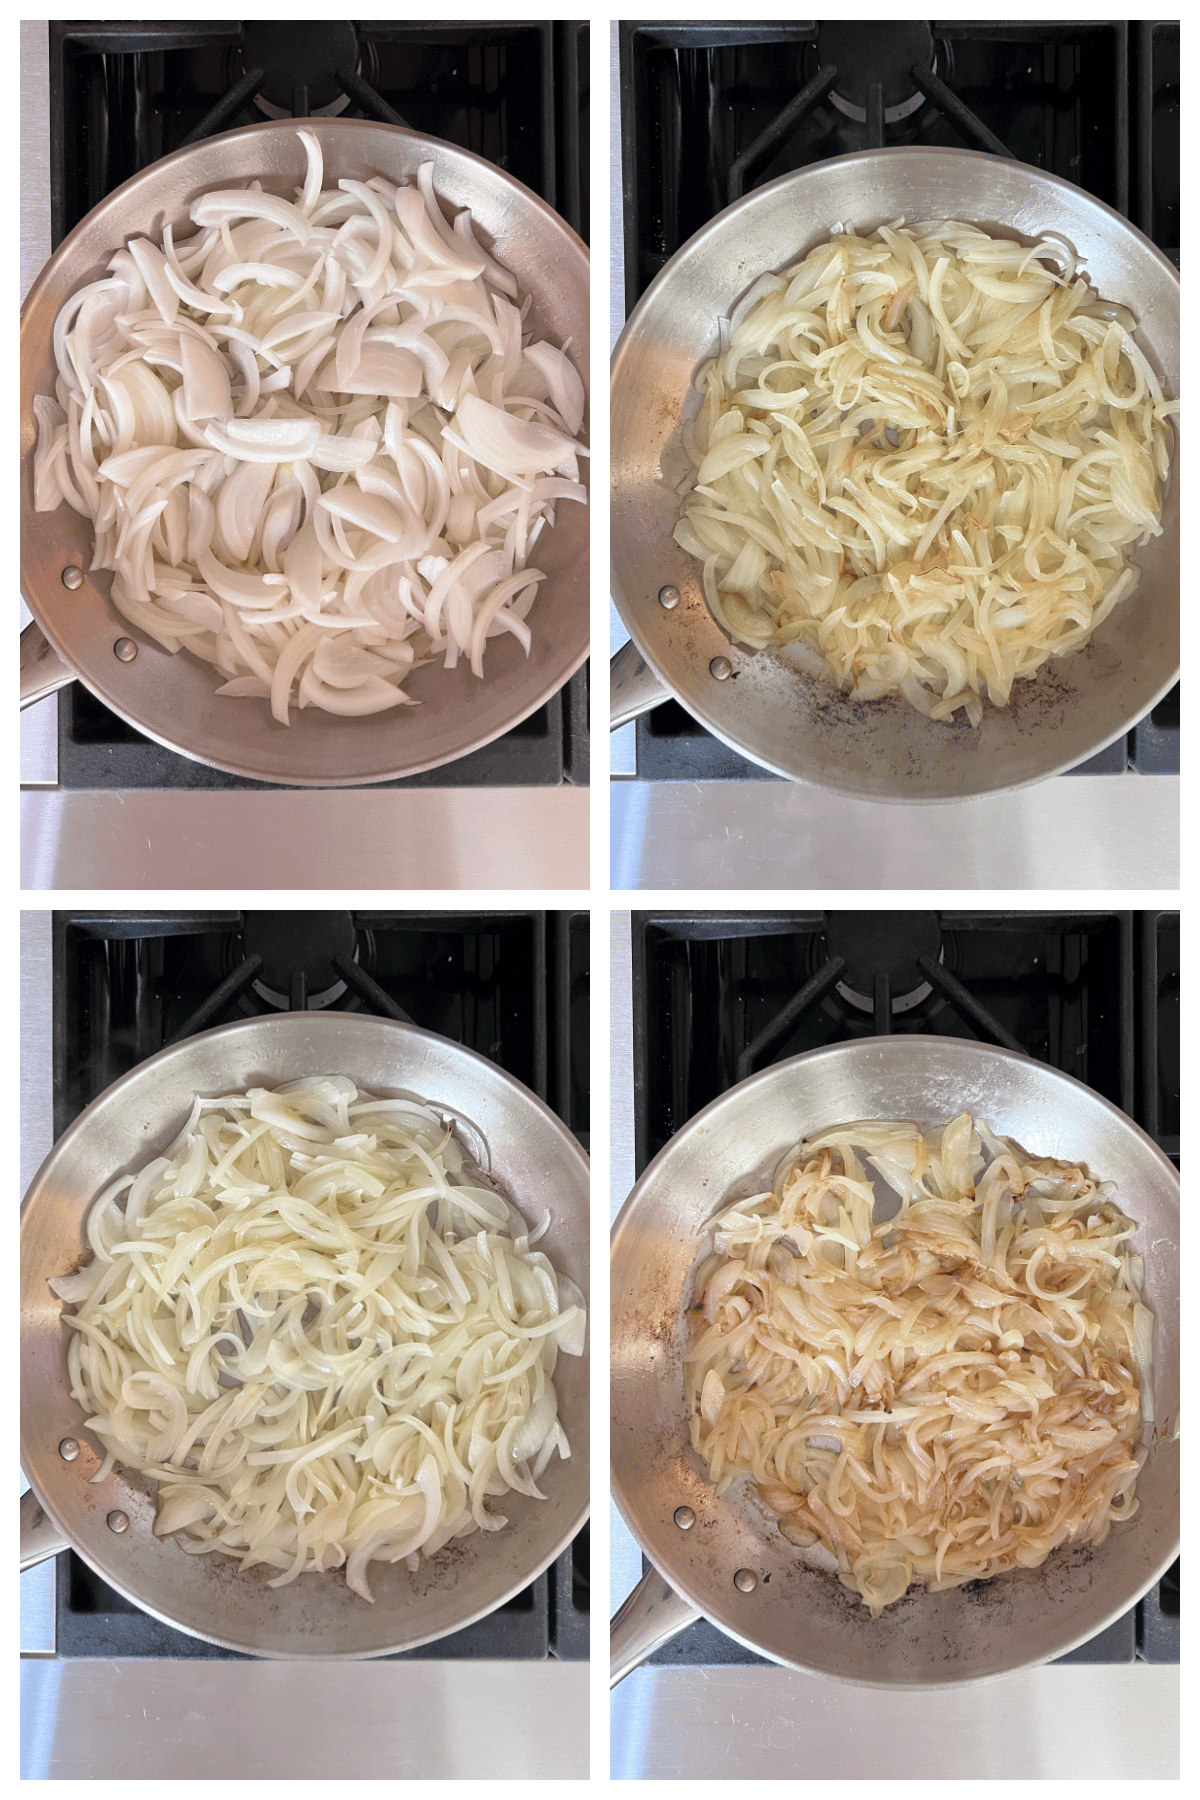 for a how to caramelize onions tutorial, an overhead view of four stages of sliced onions cooking in a stainless skillet - the beginnings showing raw white onion, then beginning to yellow and turn light golden